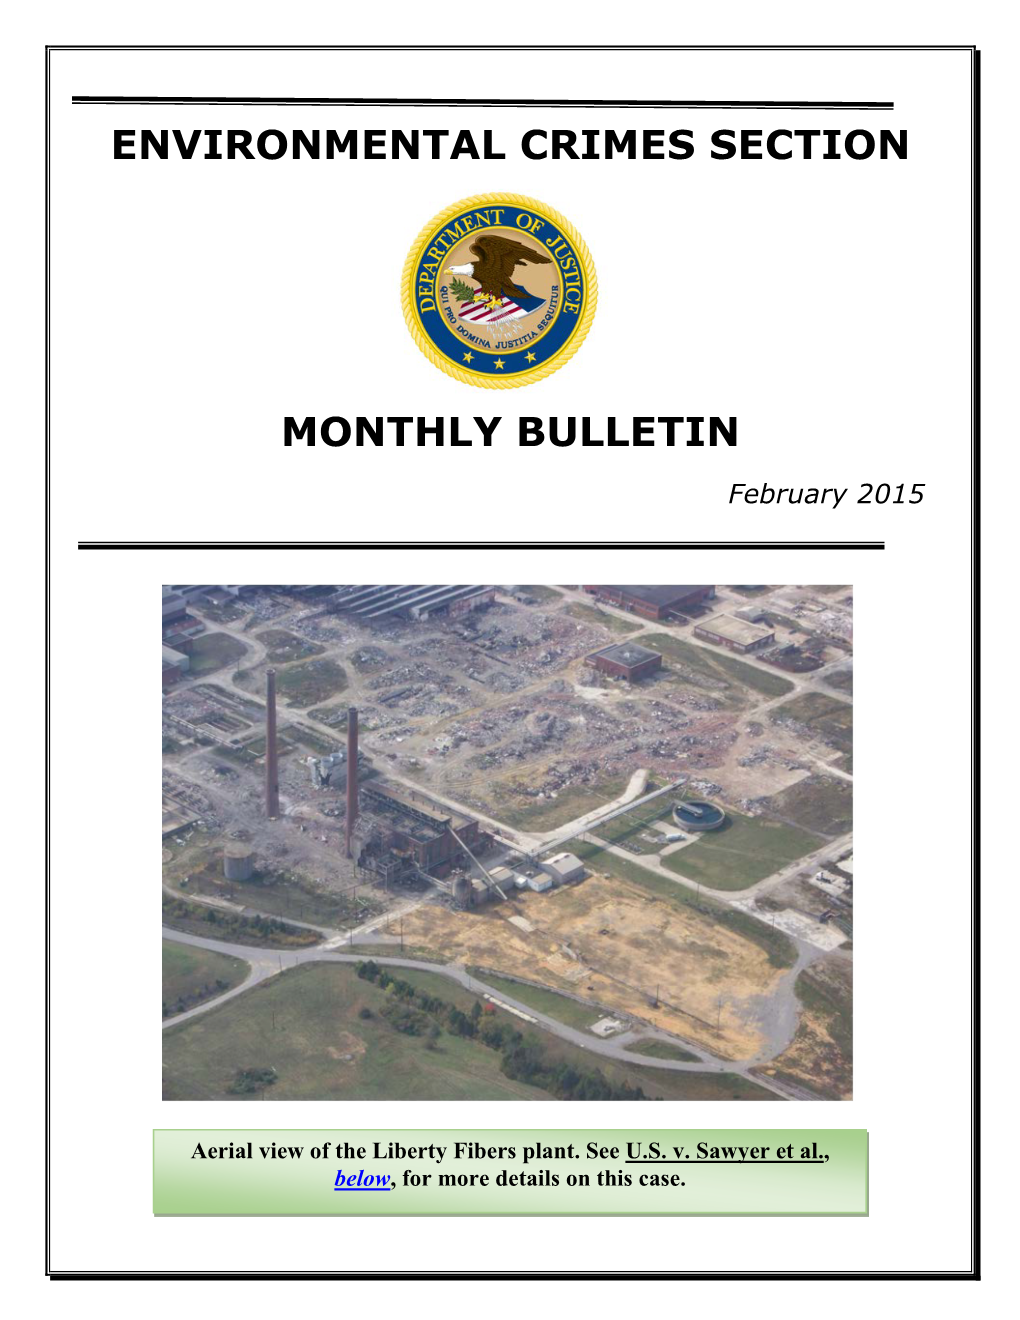 Environmental Crimes Section Monthly Bulletin February 2015